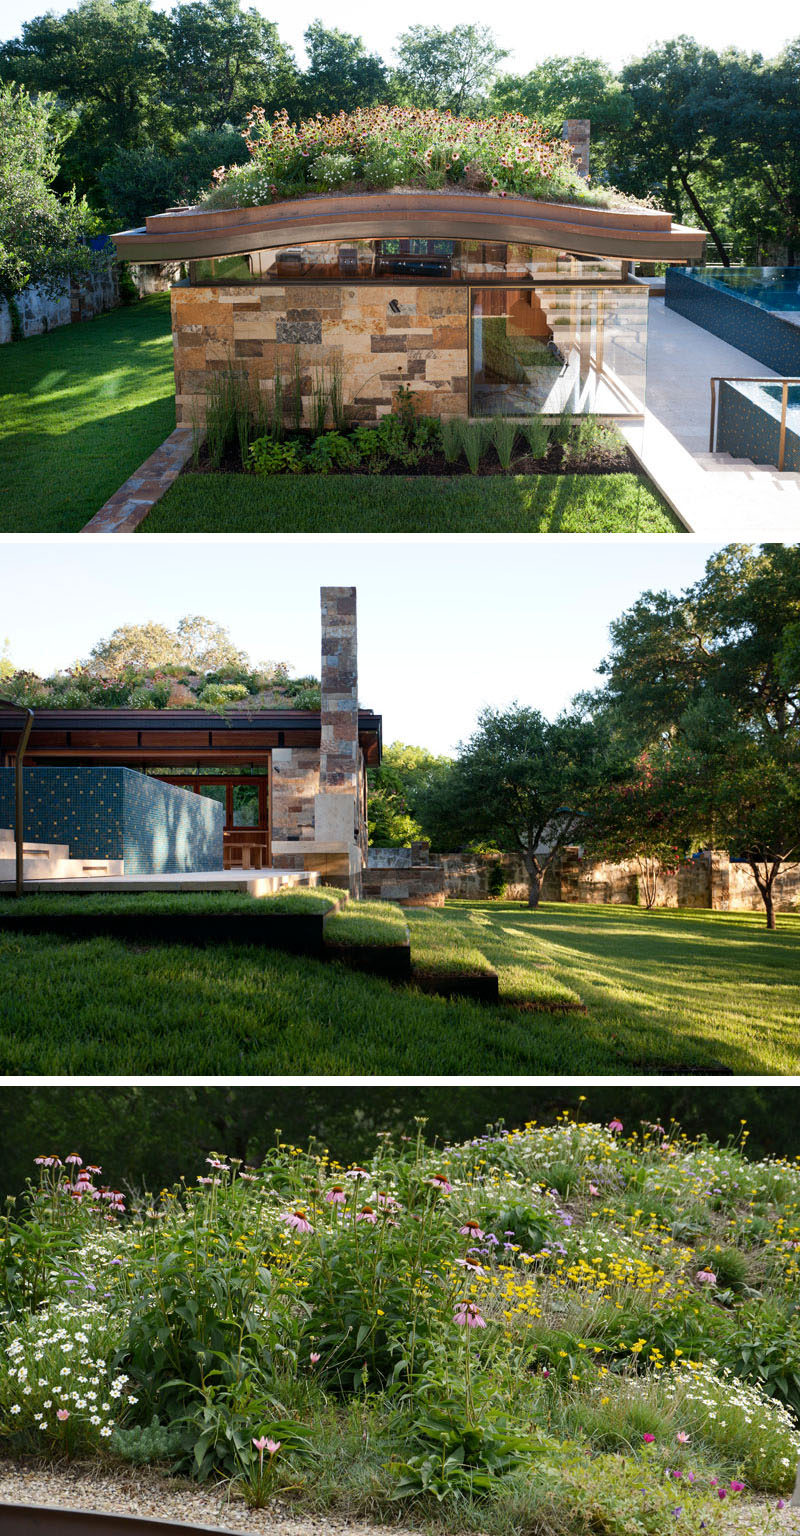 Murray Legge Architecture have designed a modern pool house, swimming pool, spa and terraced landscape for a home in Westlake Hills, Texas. #PoolHouse #GreenRoof #SwimmingPool #Landscaping